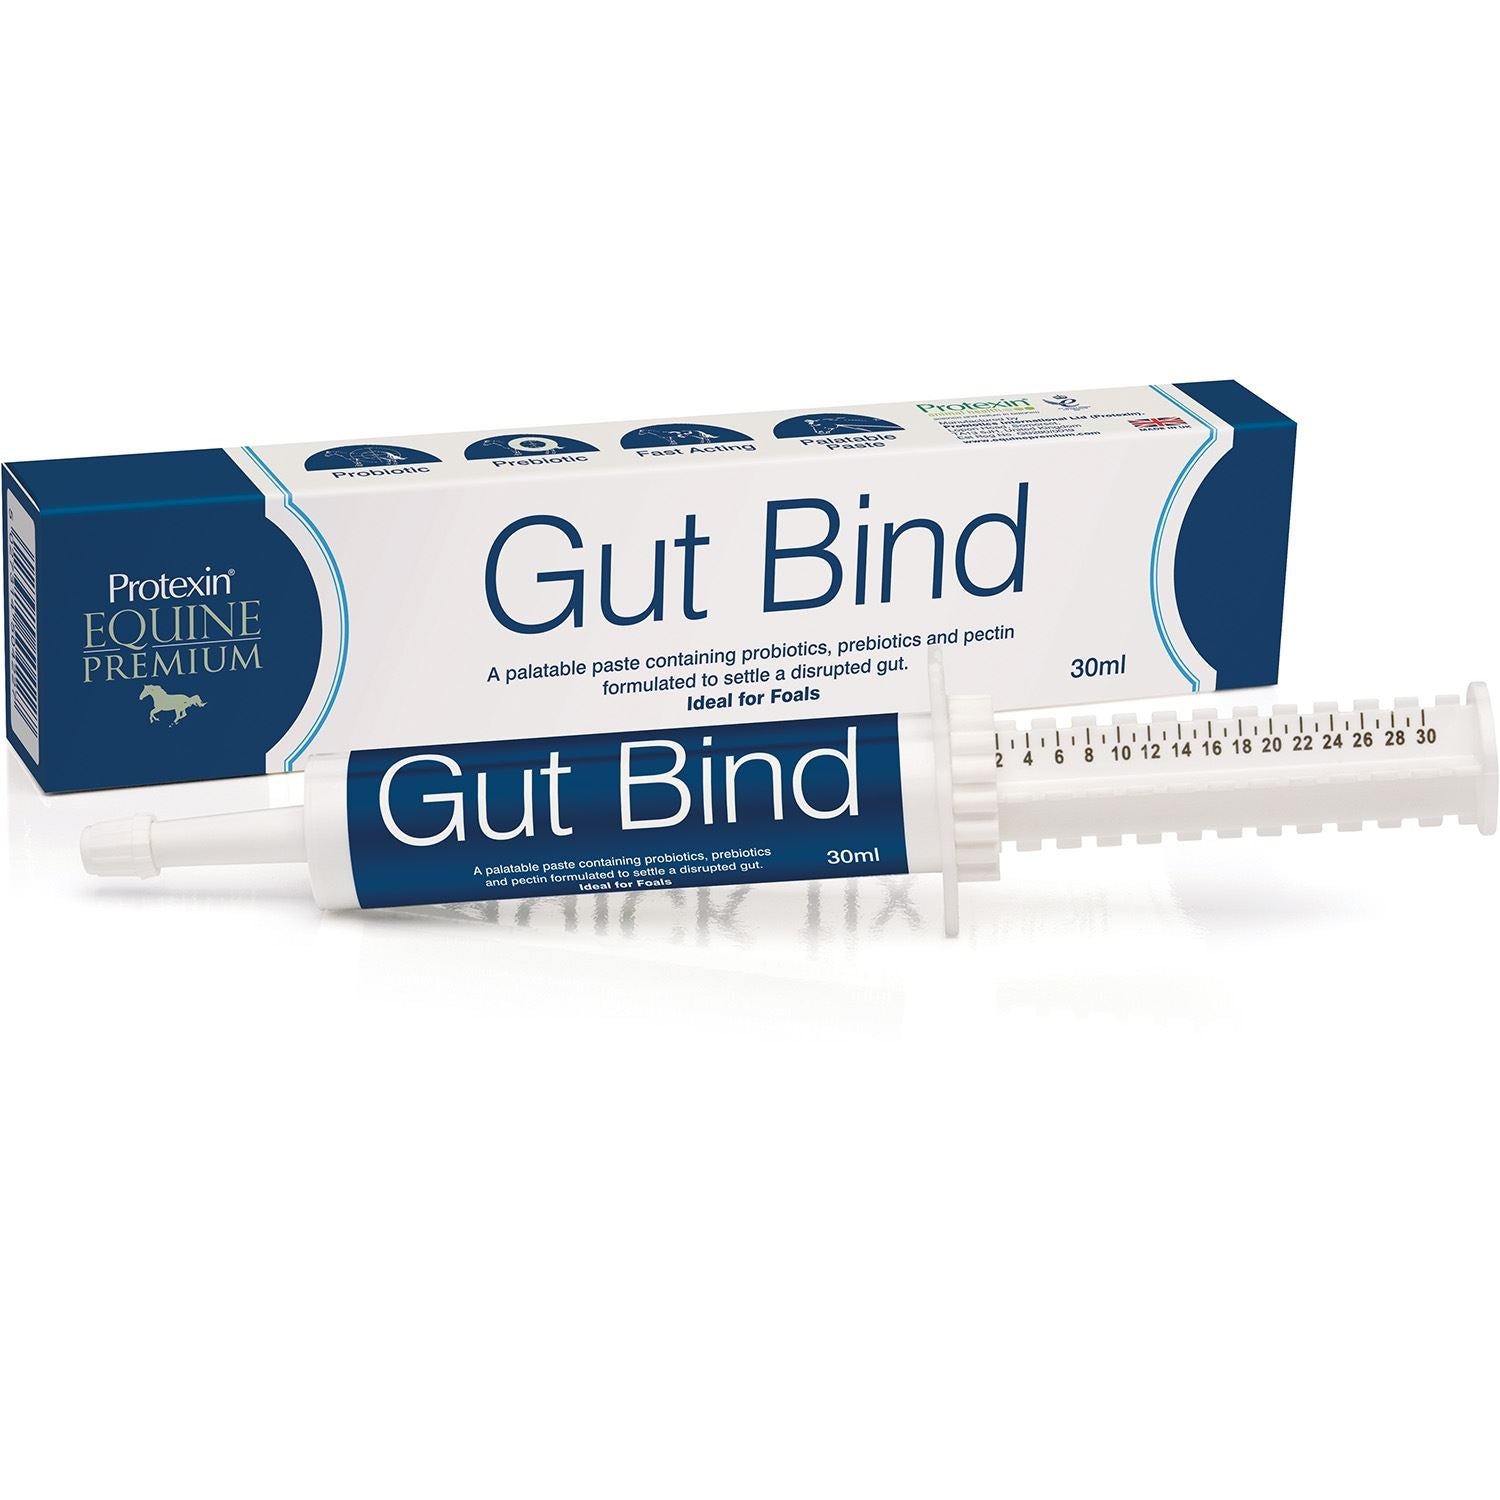 Protexin Gut Bind - Just Horse Riders